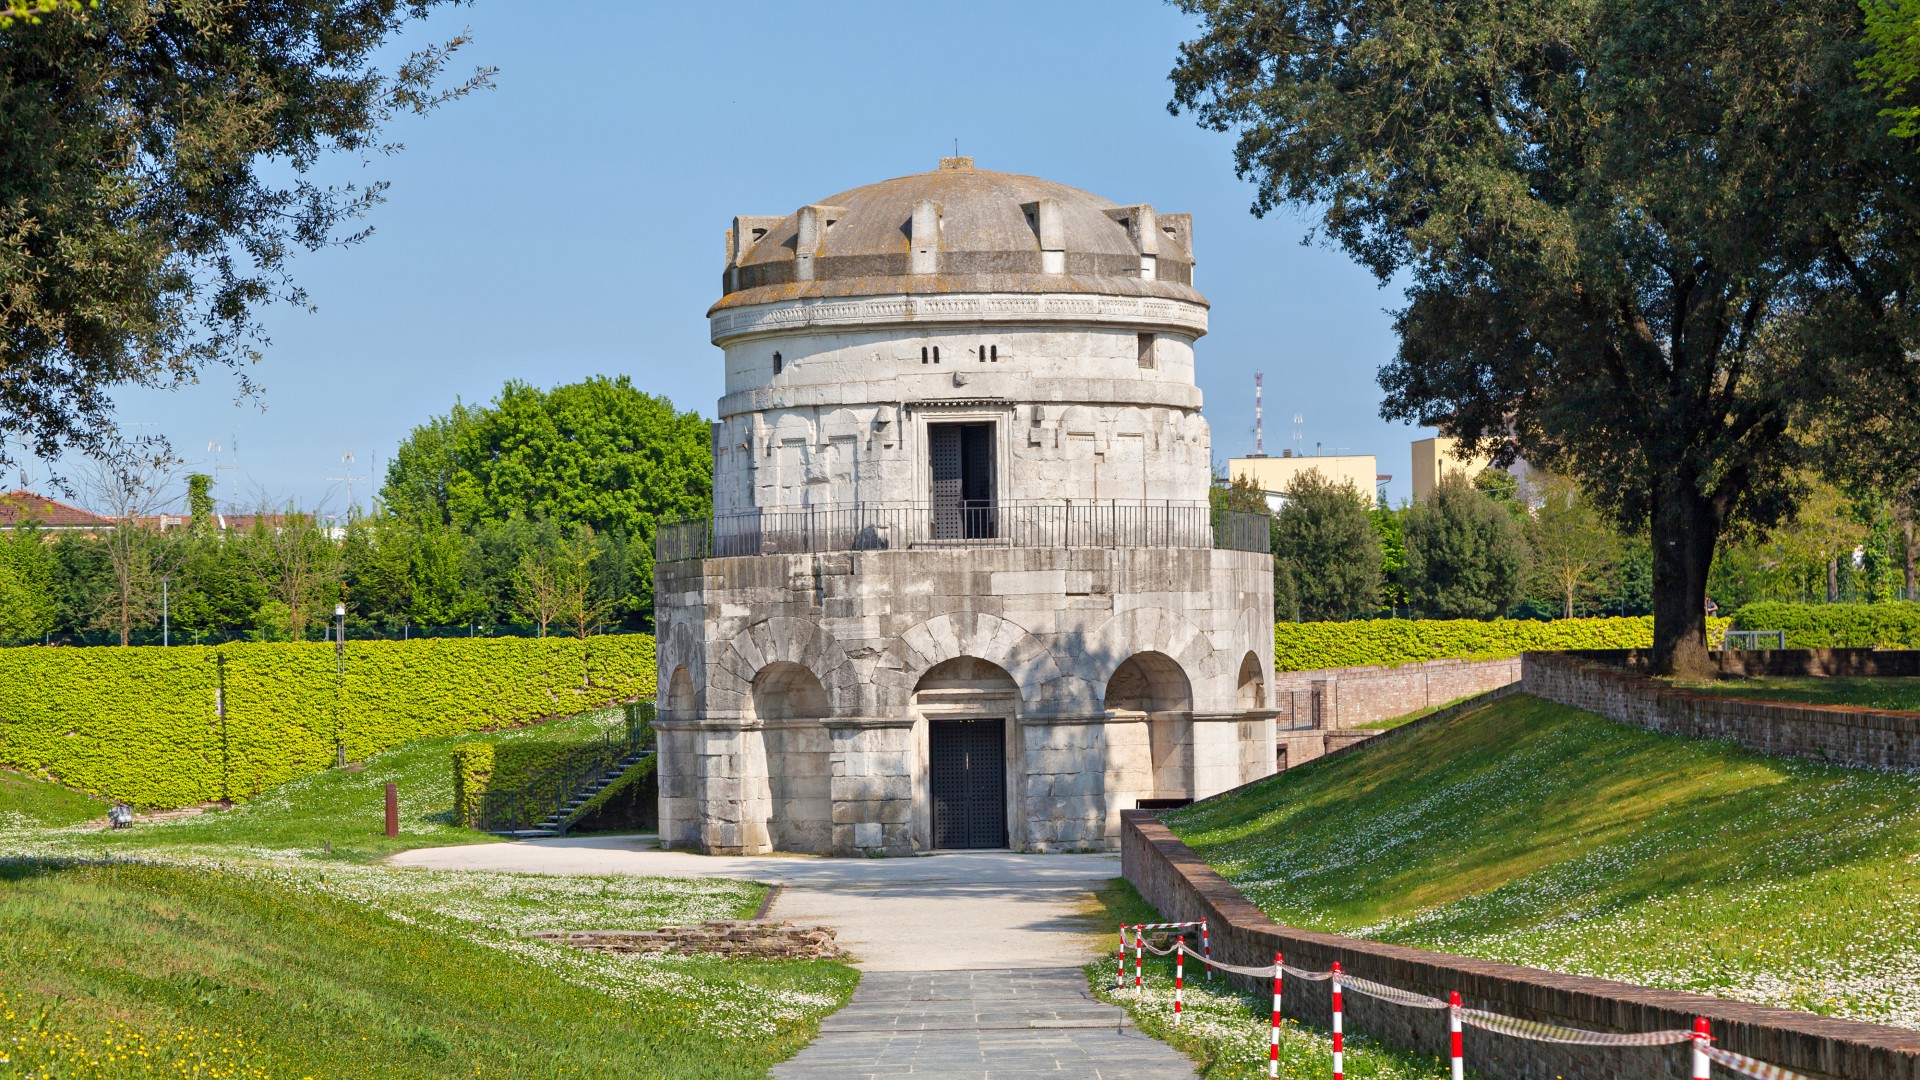 Mausoleum of Theoderic - an ancient monument built in 520 AD by Theoderic the Great as his future tomb.